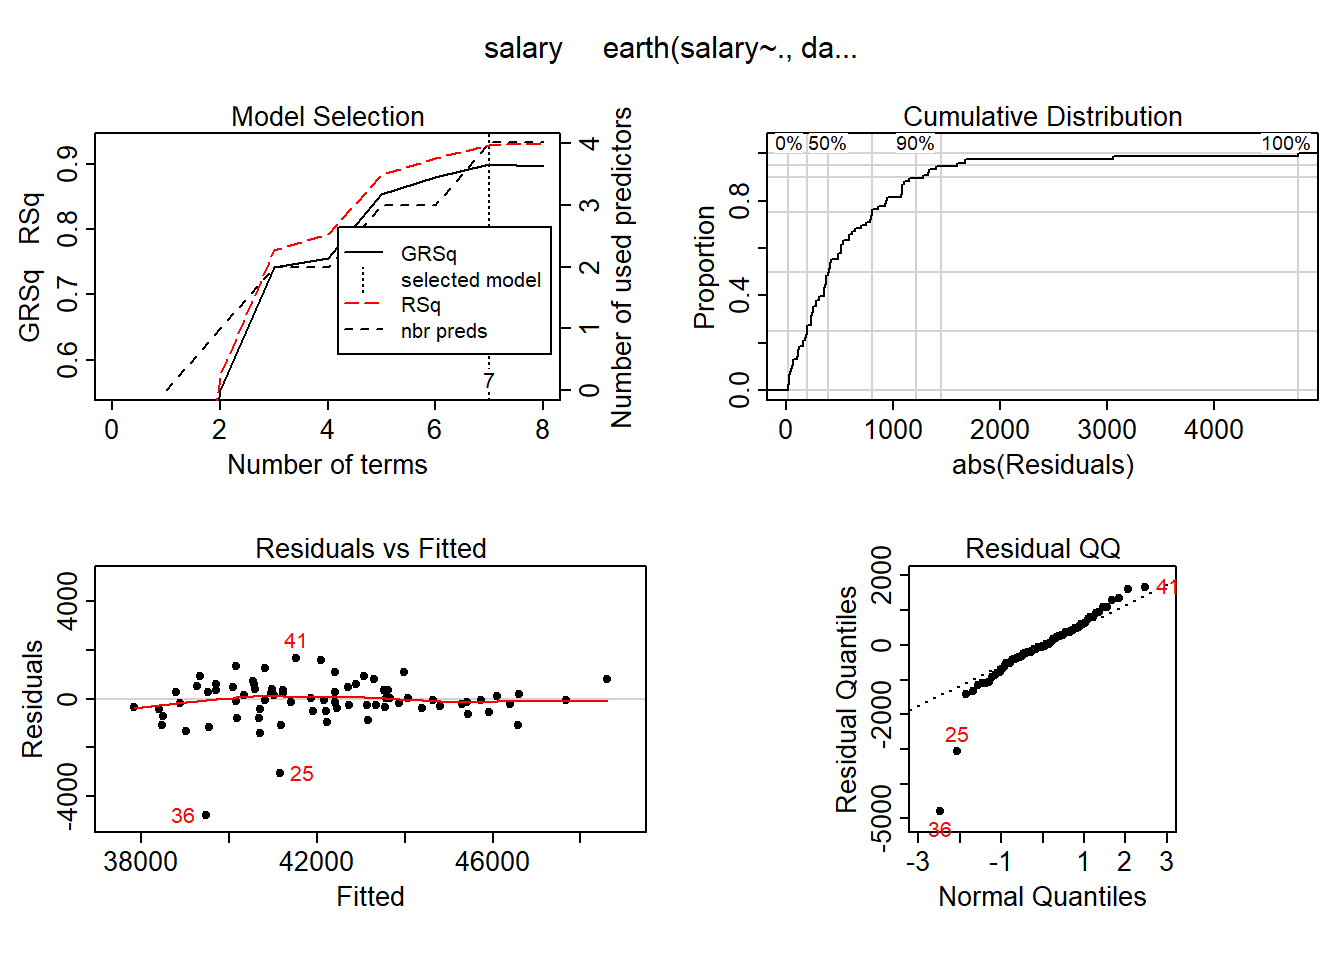 Hockey-stick functions fit with MARS for the predictors using no interactions, Year 2014 - 2018